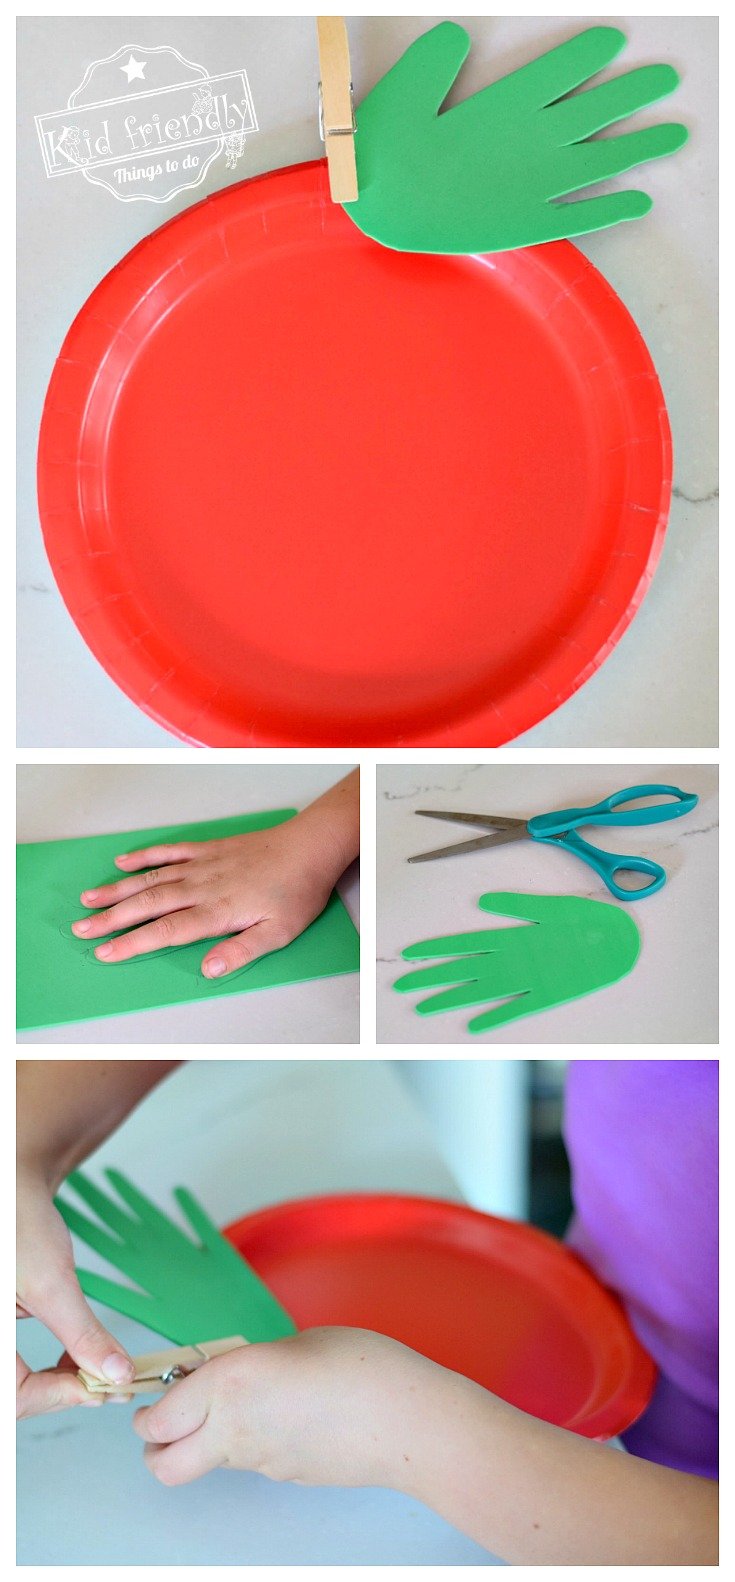 Make a Simple Paper Plate & Handprint Apple with the Kids - Easy and adorable. Great Fall, back to school, & preschool craft - www.kidfriendlythingstodo.com